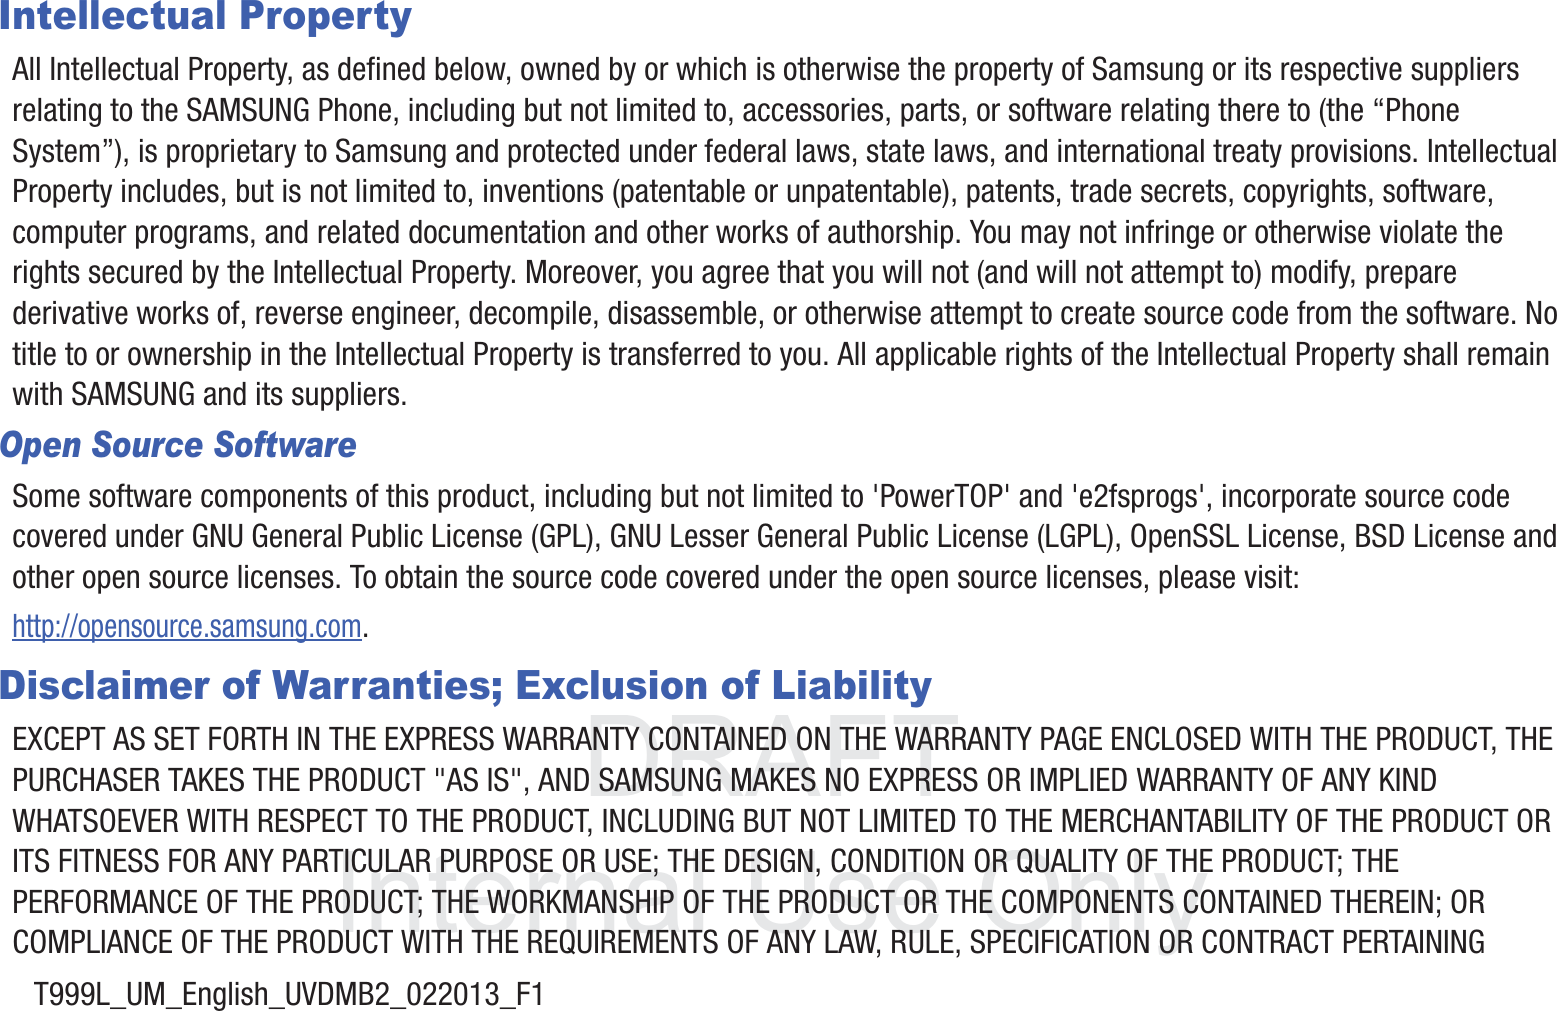 DRAFT InternalUse OnlyT999L_UM_English_UVDMB2_022013_F1Intellectual PropertyAll Intellectual Property, as defined below, owned by or which is otherwise the property of Samsung or its respective suppliers relating to the SAMSUNG Phone, including but not limited to, accessories, parts, or software relating there to (the “Phone System”), is proprietary to Samsung and protected under federal laws, state laws, and international treaty provisions. Intellectual Property includes, but is not limited to, inventions (patentable or unpatentable), patents, trade secrets, copyrights, software, computer programs, and related documentation and other works of authorship. You may not infringe or otherwise violate the rights secured by the Intellectual Property. Moreover, you agree that you will not (and will not attempt to) modify, prepare derivative works of, reverse engineer, decompile, disassemble, or otherwise attempt to create source code from the software. No title to or ownership in the Intellectual Property is transferred to you. All applicable rights of the Intellectual Property shall remain with SAMSUNG and its suppliers.Open Source SoftwareSome software components of this product, including but not limited to &apos;PowerTOP&apos; and &apos;e2fsprogs&apos;, incorporate source code covered under GNU General Public License (GPL), GNU Lesser General Public License (LGPL), OpenSSL License, BSD License and other open source licenses. To obtain the source code covered under the open source licenses, please visit:http://opensource.samsung.com.Disclaimer of Warranties; Exclusion of LiabilityEXCEPT AS SET FORTH IN THE EXPRESS WARRANTY CONTAINED ON THE WARRANTY PAGE ENCLOSED WITH THE PRODUCT, THE PURCHASER TAKES THE PRODUCT &quot;AS IS&quot;, AND SAMSUNG MAKES NO EXPRESS OR IMPLIED WARRANTY OF ANY KIND WHATSOEVER WITH RESPECT TO THE PRODUCT, INCLUDING BUT NOT LIMITED TO THE MERCHANTABILITY OF THE PRODUCT OR ITS FITNESS FOR ANY PARTICULAR PURPOSE OR USE; THE DESIGN, CONDITION OR QUALITY OF THE PRODUCT; THE PERFORMANCE OF THE PRODUCT; THE WORKMANSHIP OF THE PRODUCT OR THE COMPONENTS CONTAINED THEREIN; OR COMPLIANCE OF THE PRODUCT WITH THE REQUIREMENTS OF ANY LAW, RULE, SPECIFICATION OR CONTRACT PERTAINING 